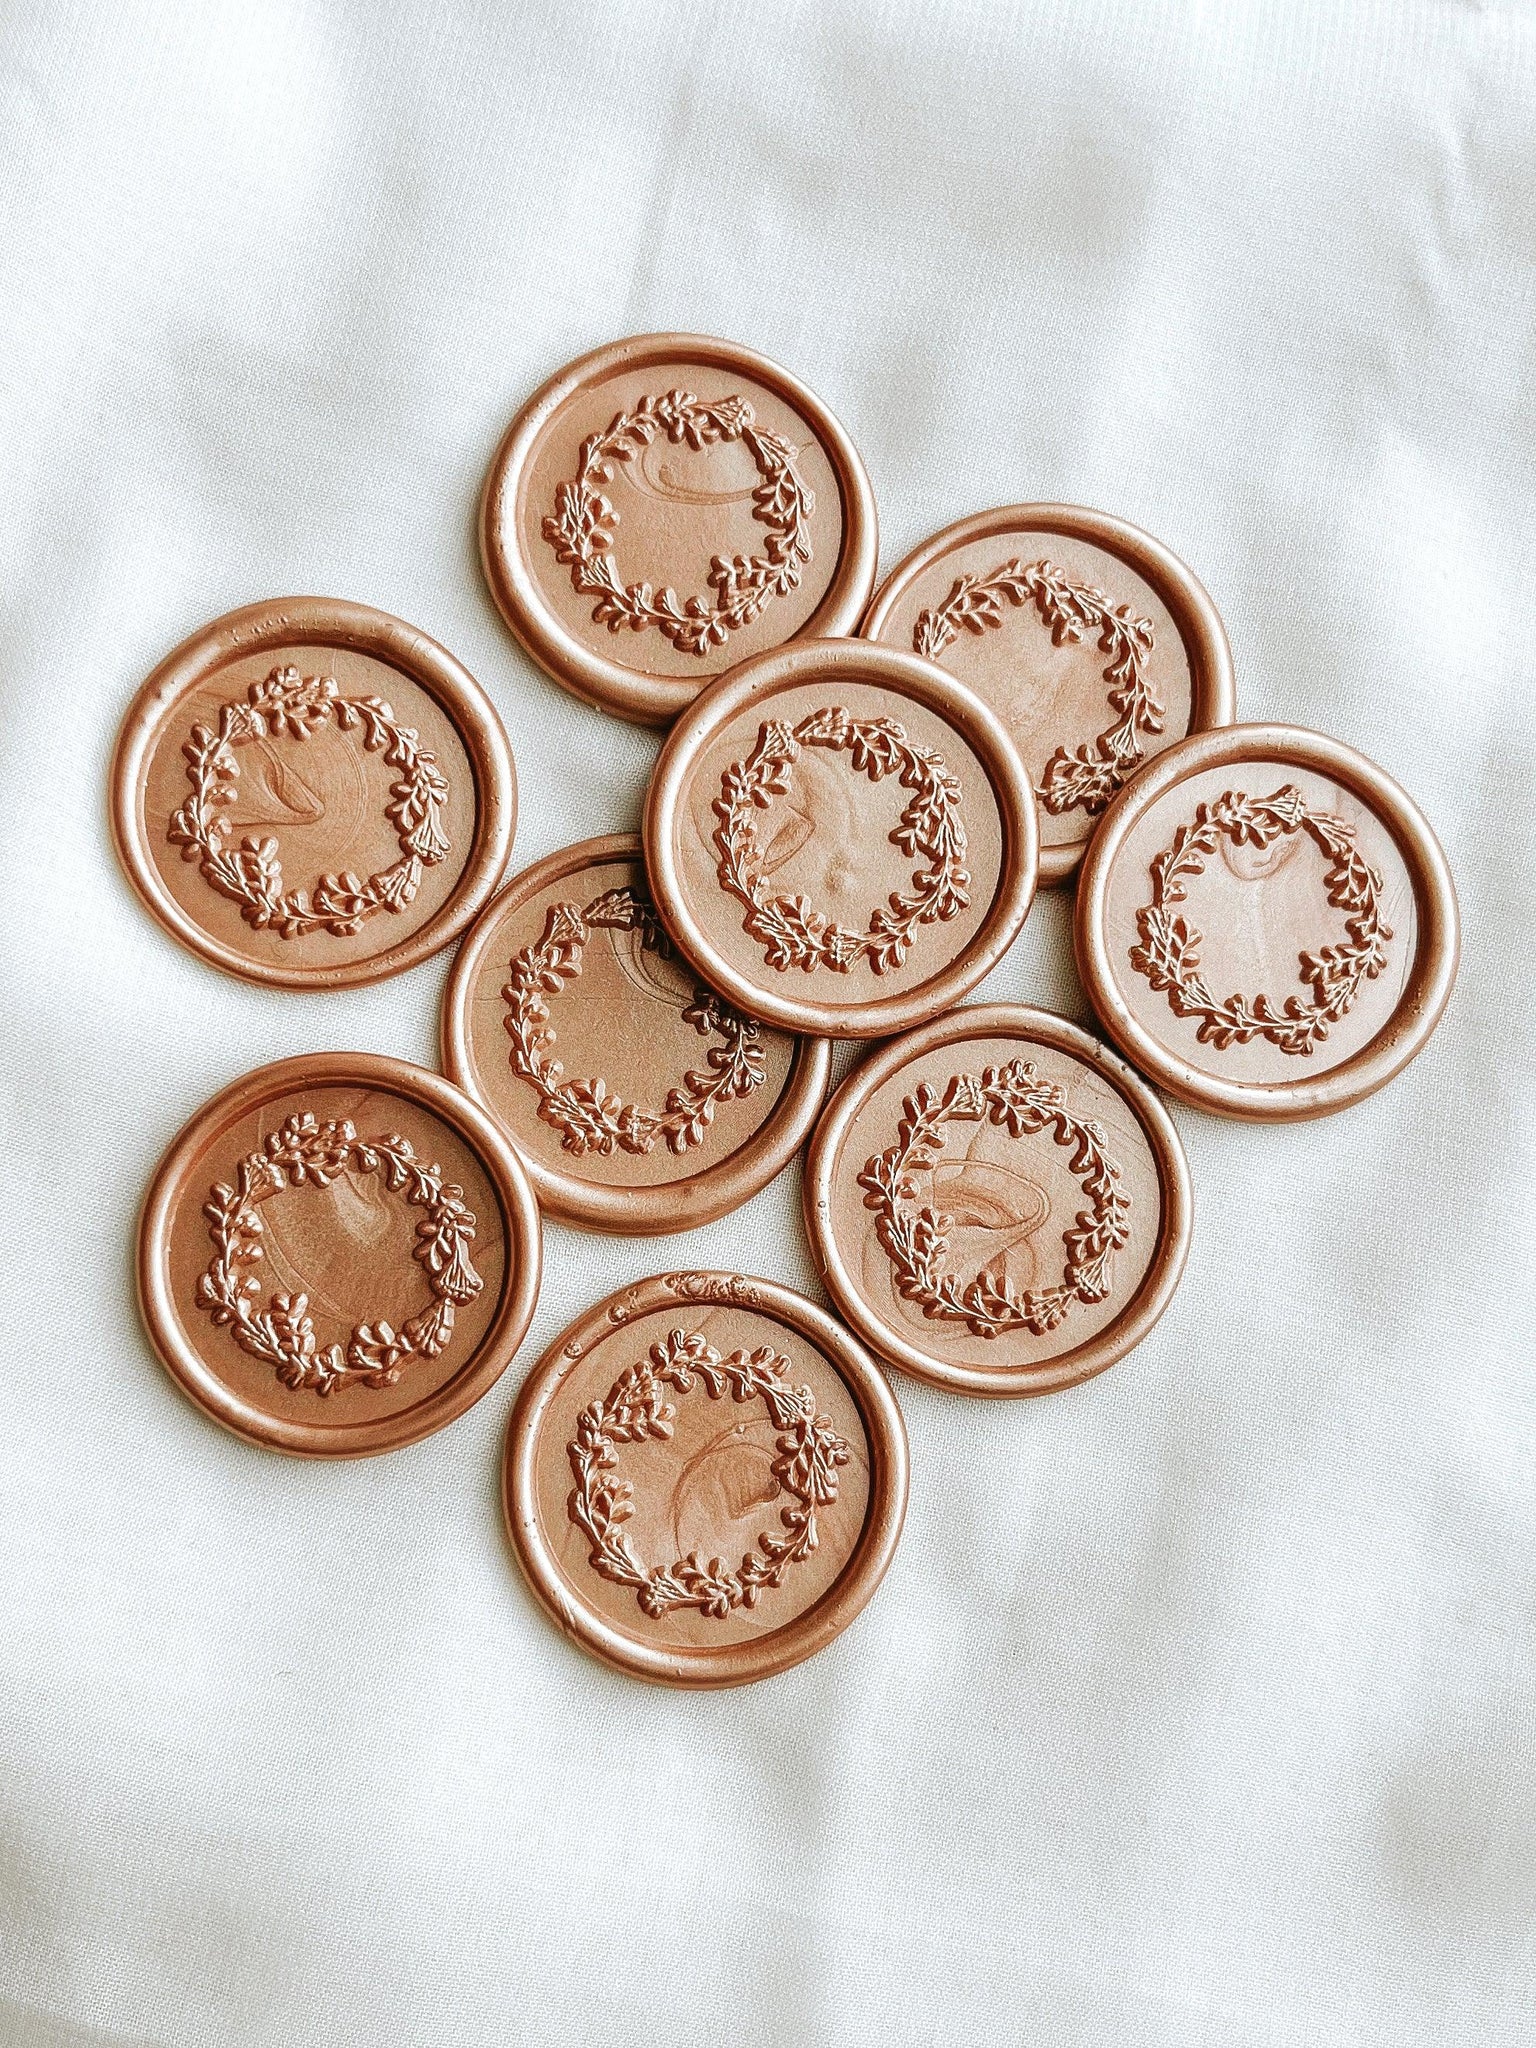 Wreath wax seals - Set of 9 - Made of Honour Co.